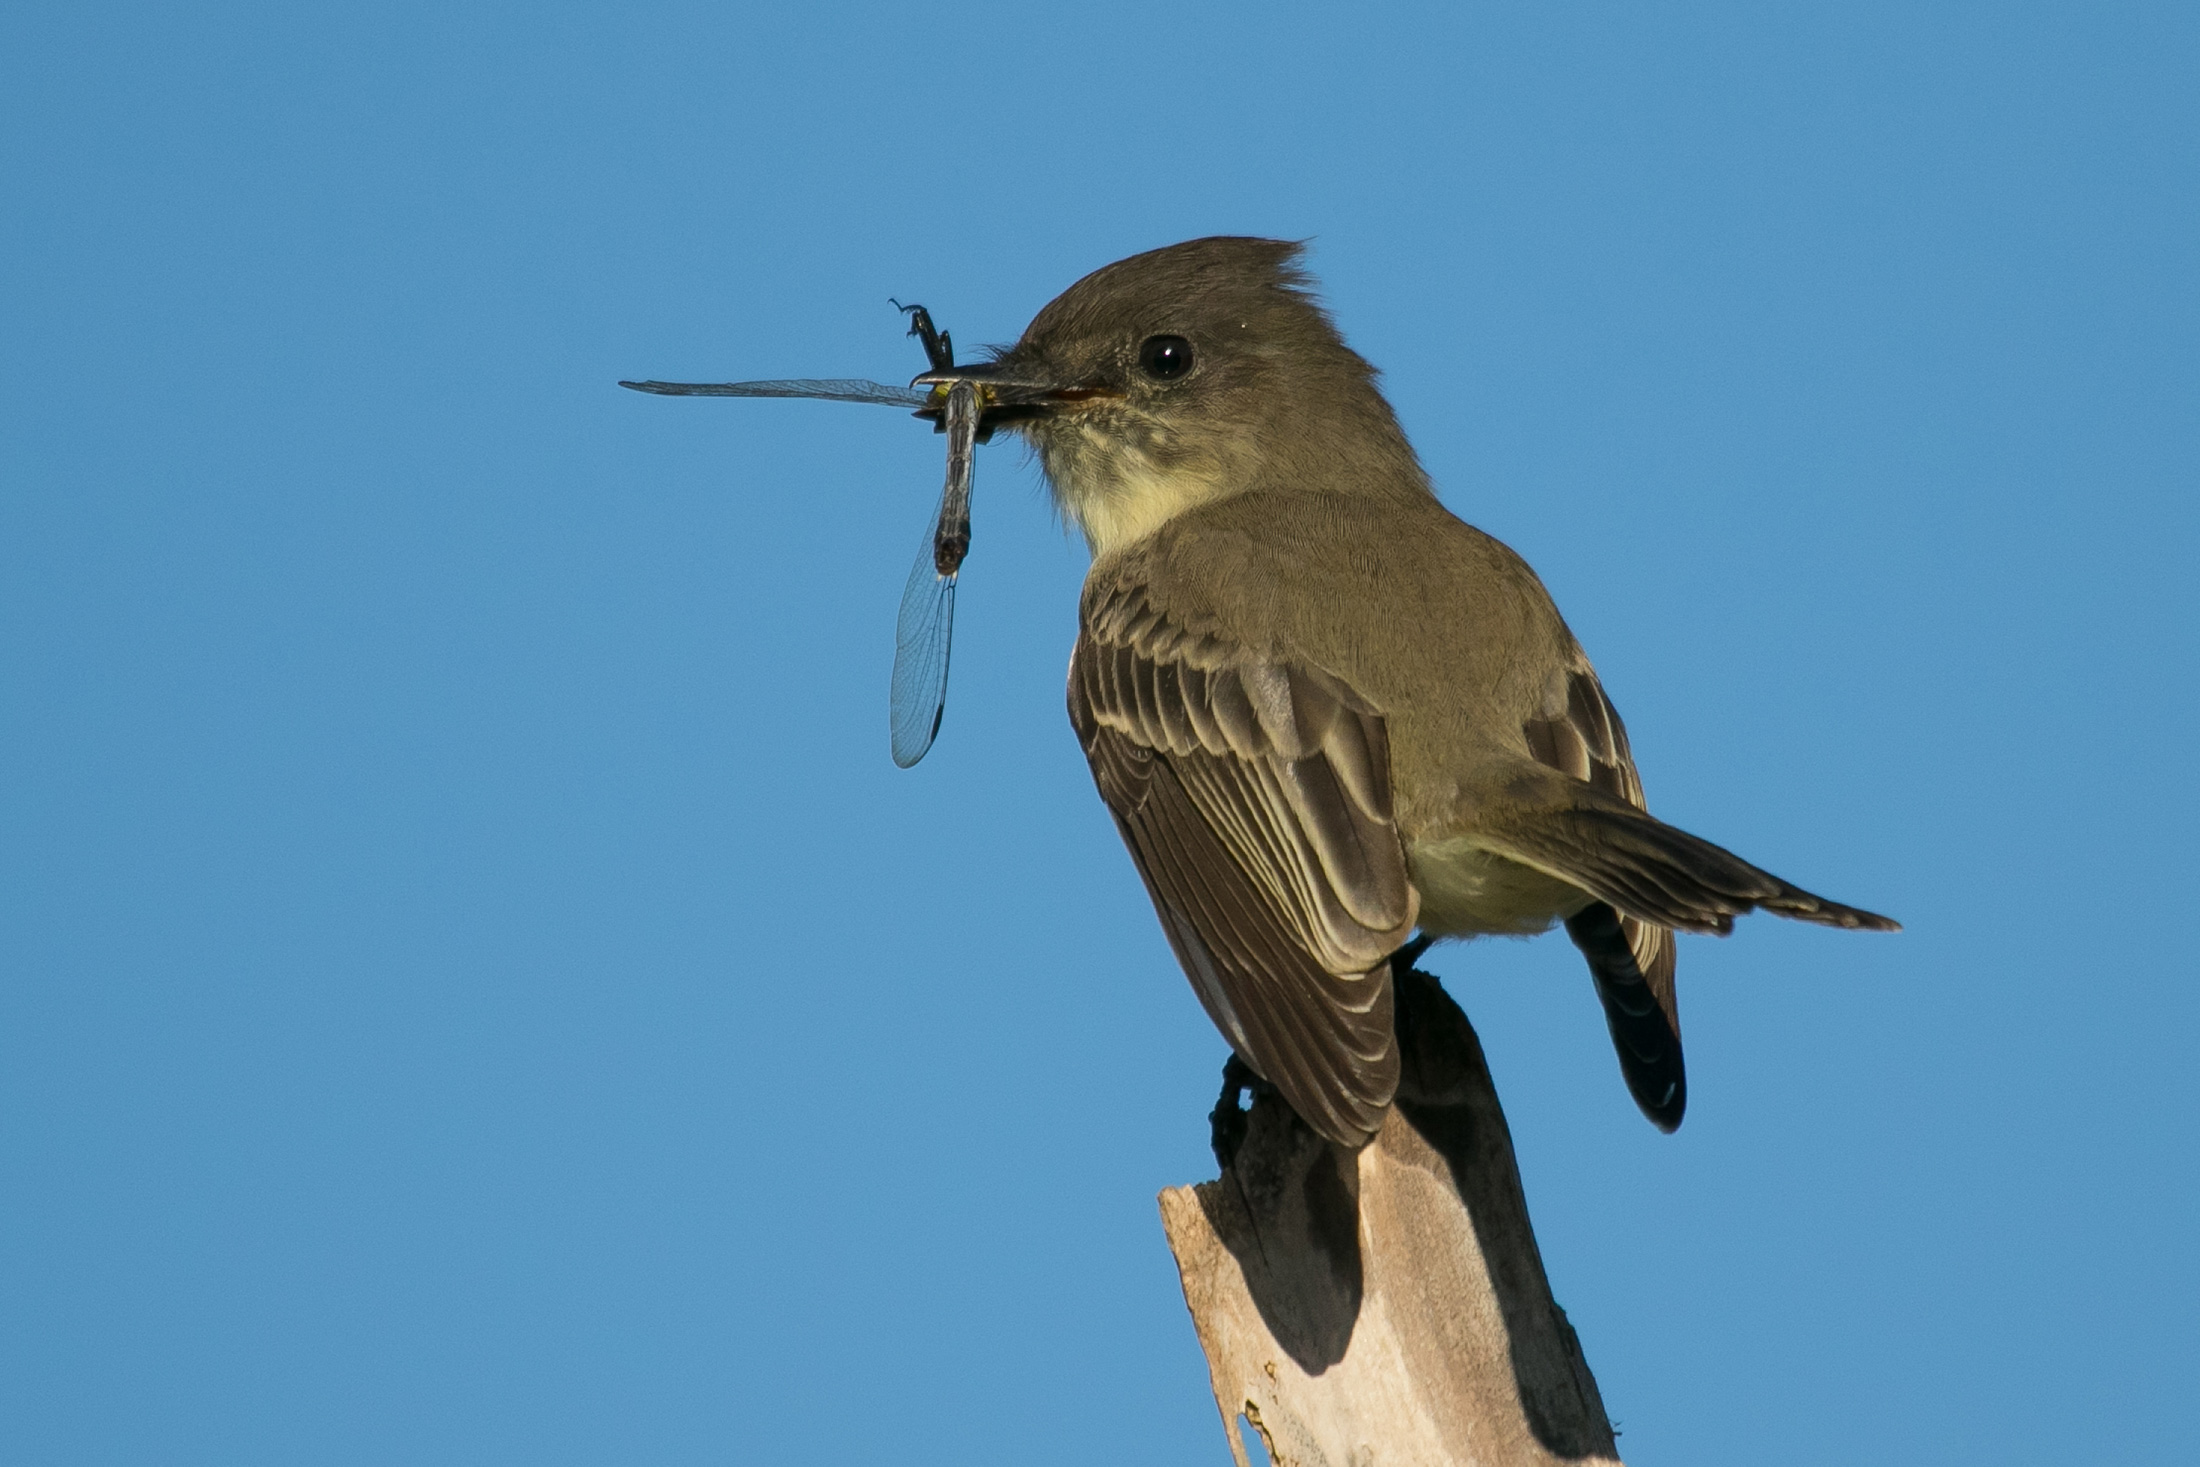 The bird stands on a perch looking left with a dragon fly sticking out of its mouth